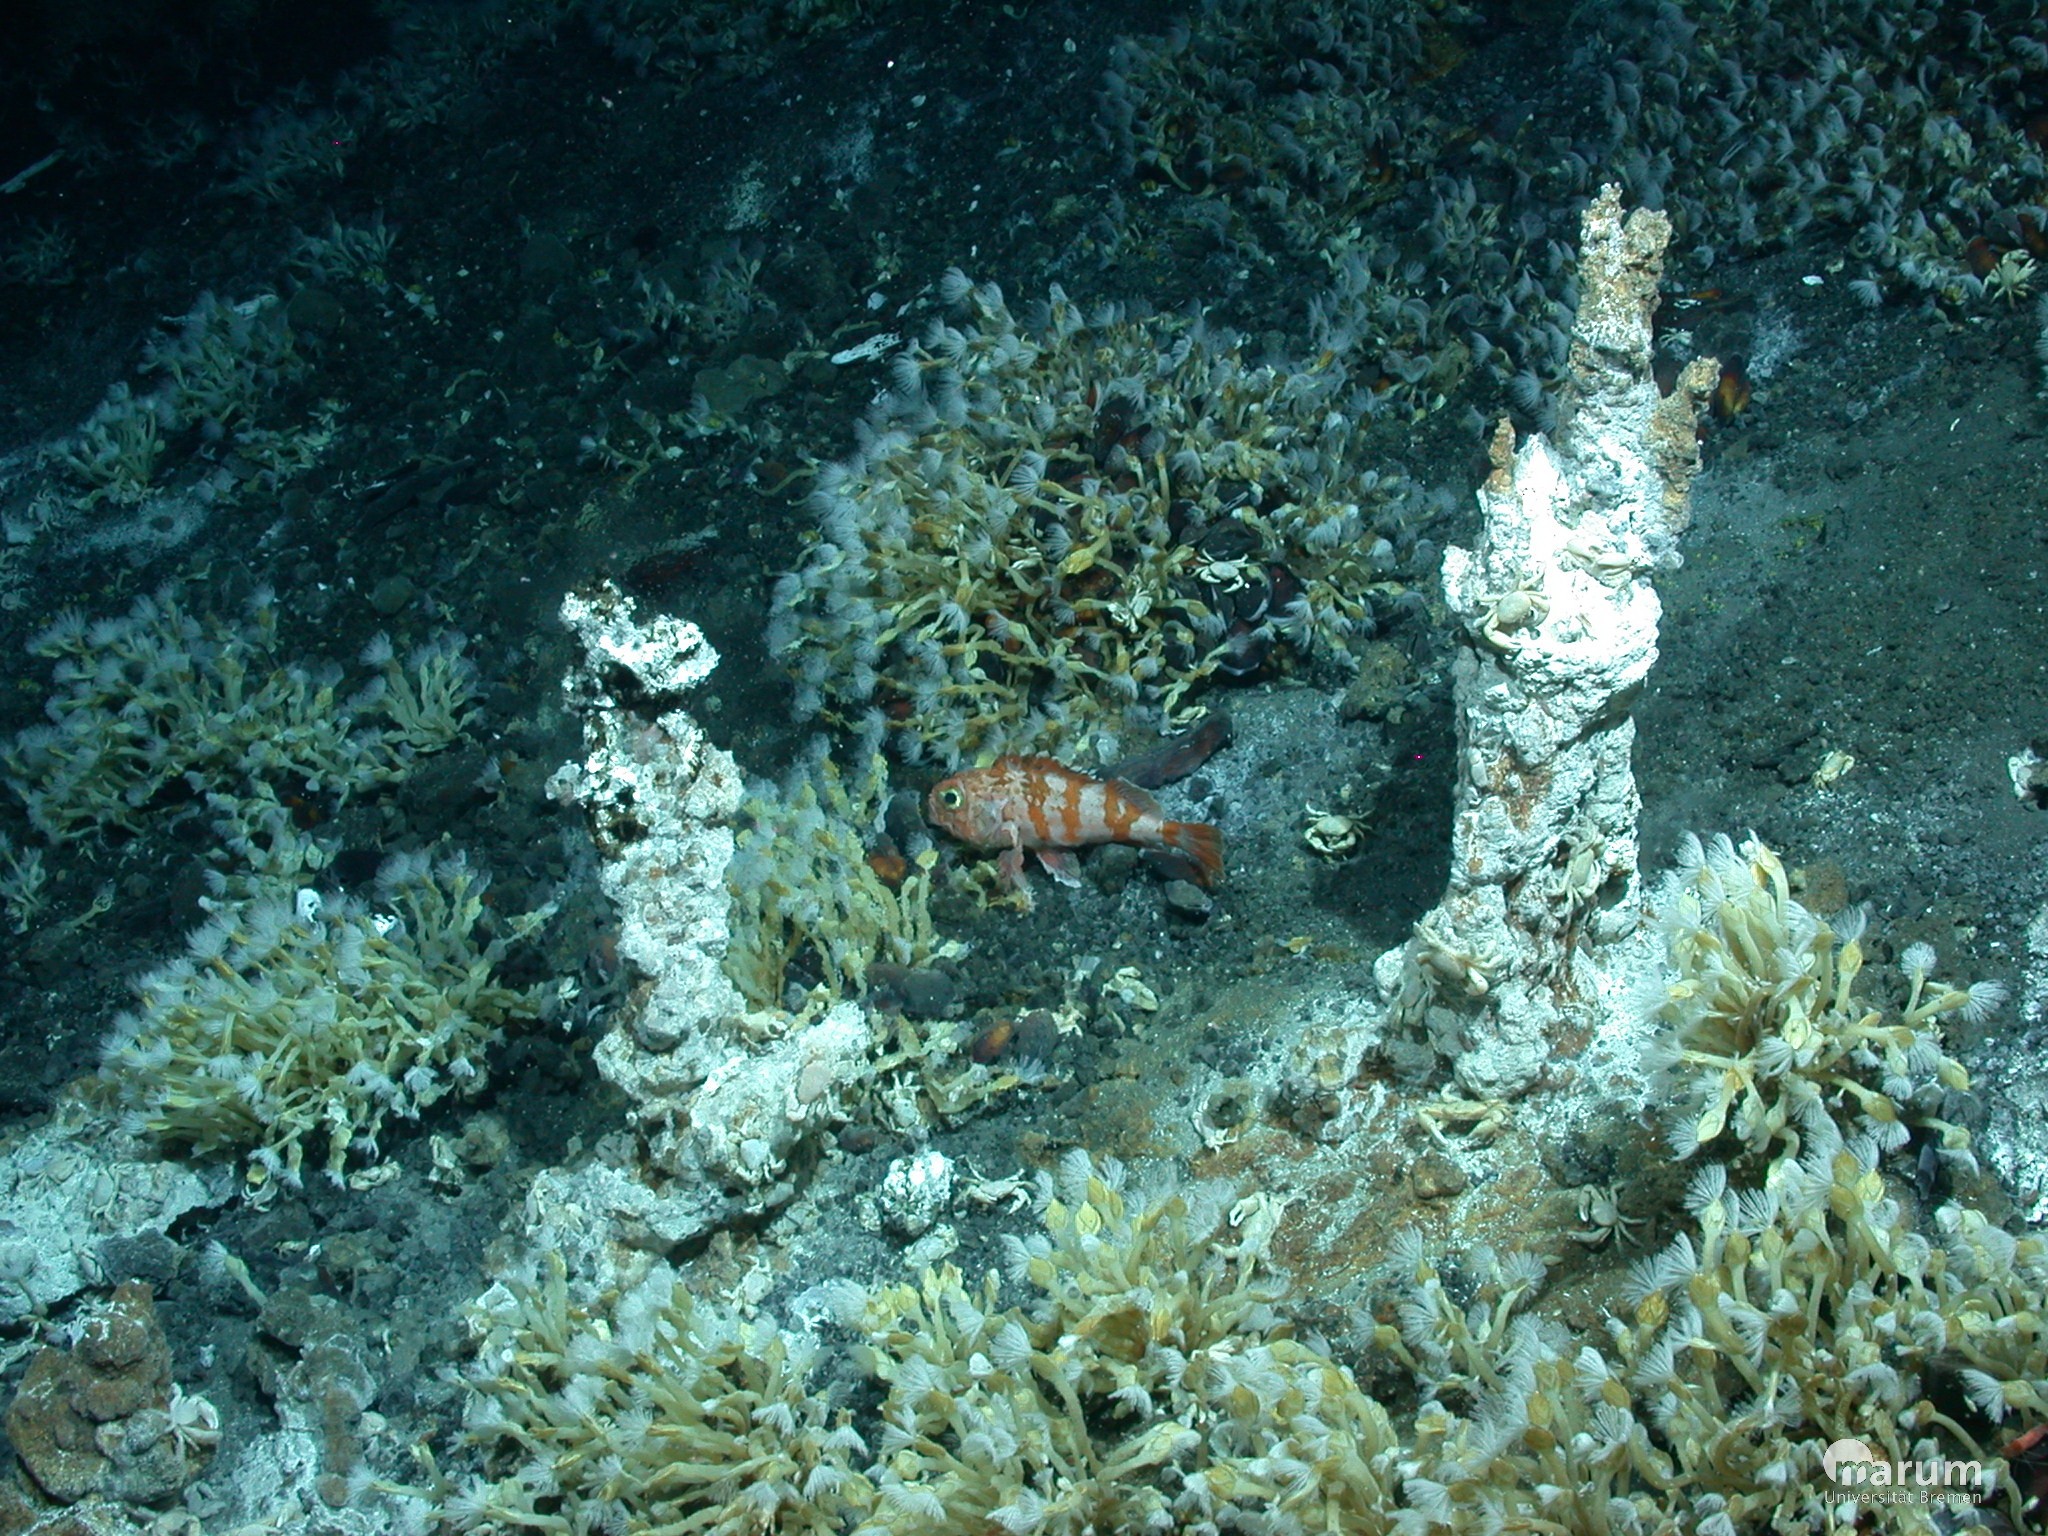 Mineral chimney and abundant life in a newly discovered hydrothermal vent field at the Haungaroa volcano (Source: MARUM,University of Bremen)